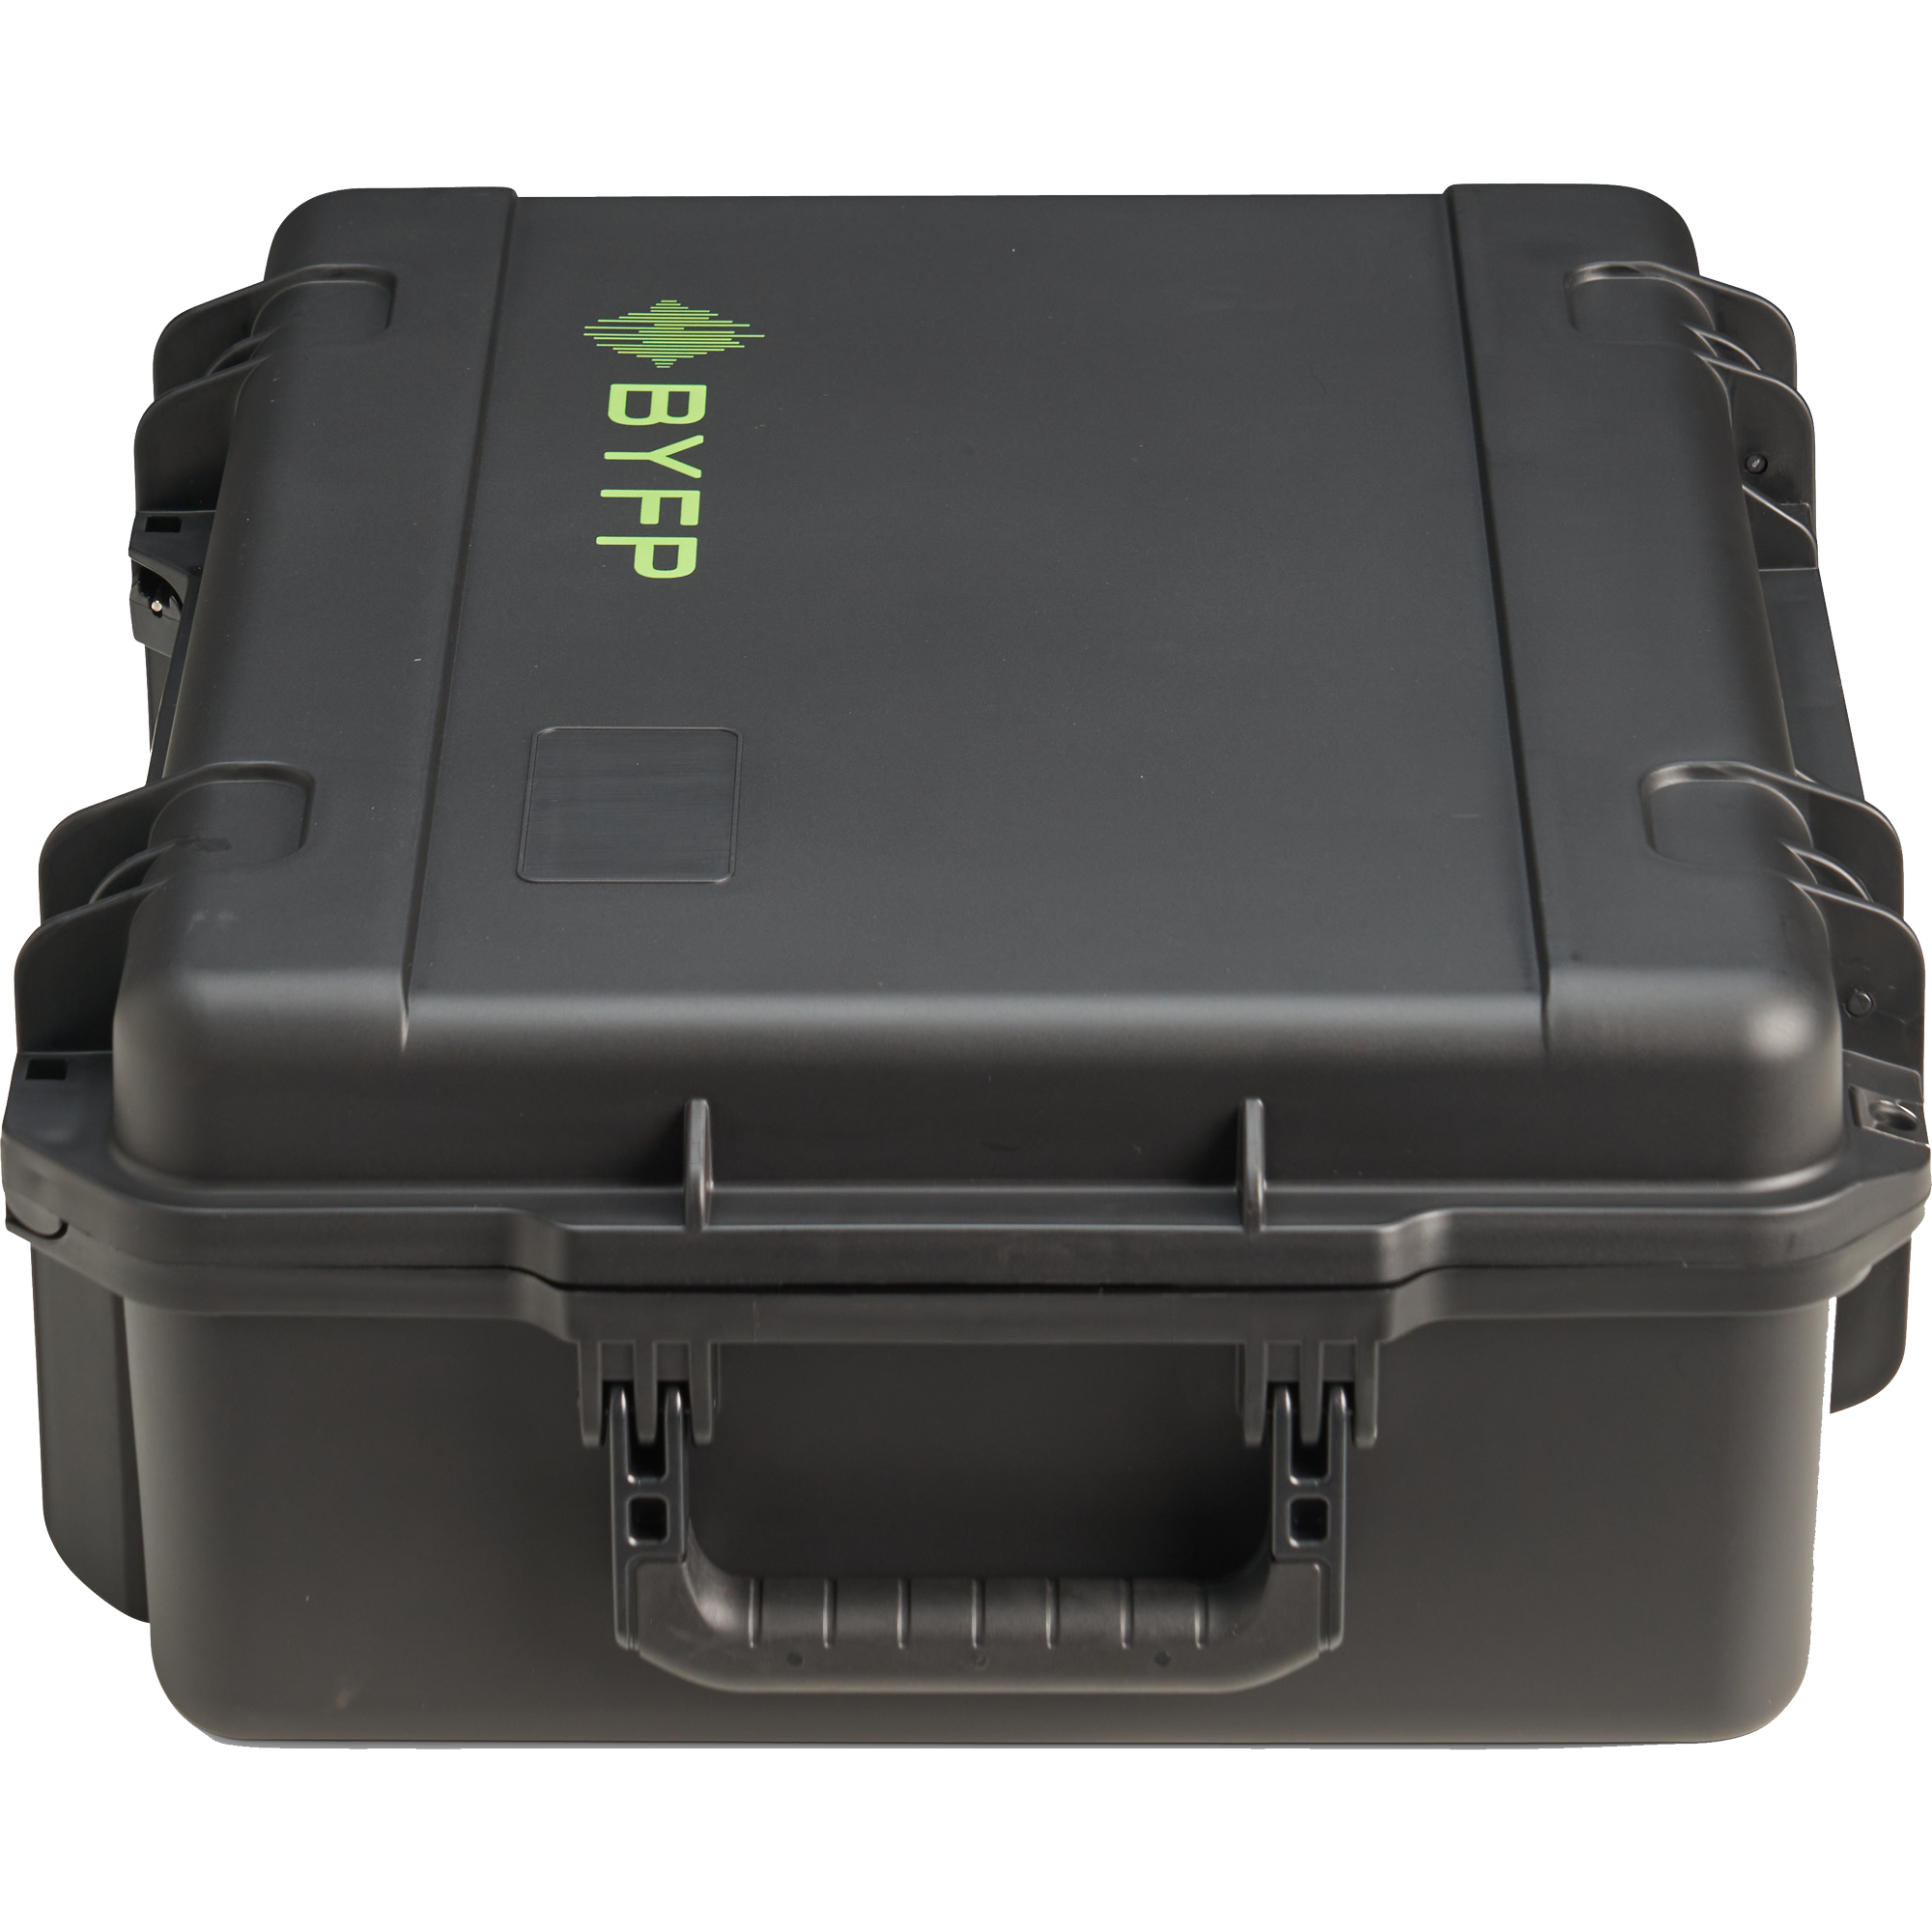 BYFP ipCase for 4x Shure Transmitters